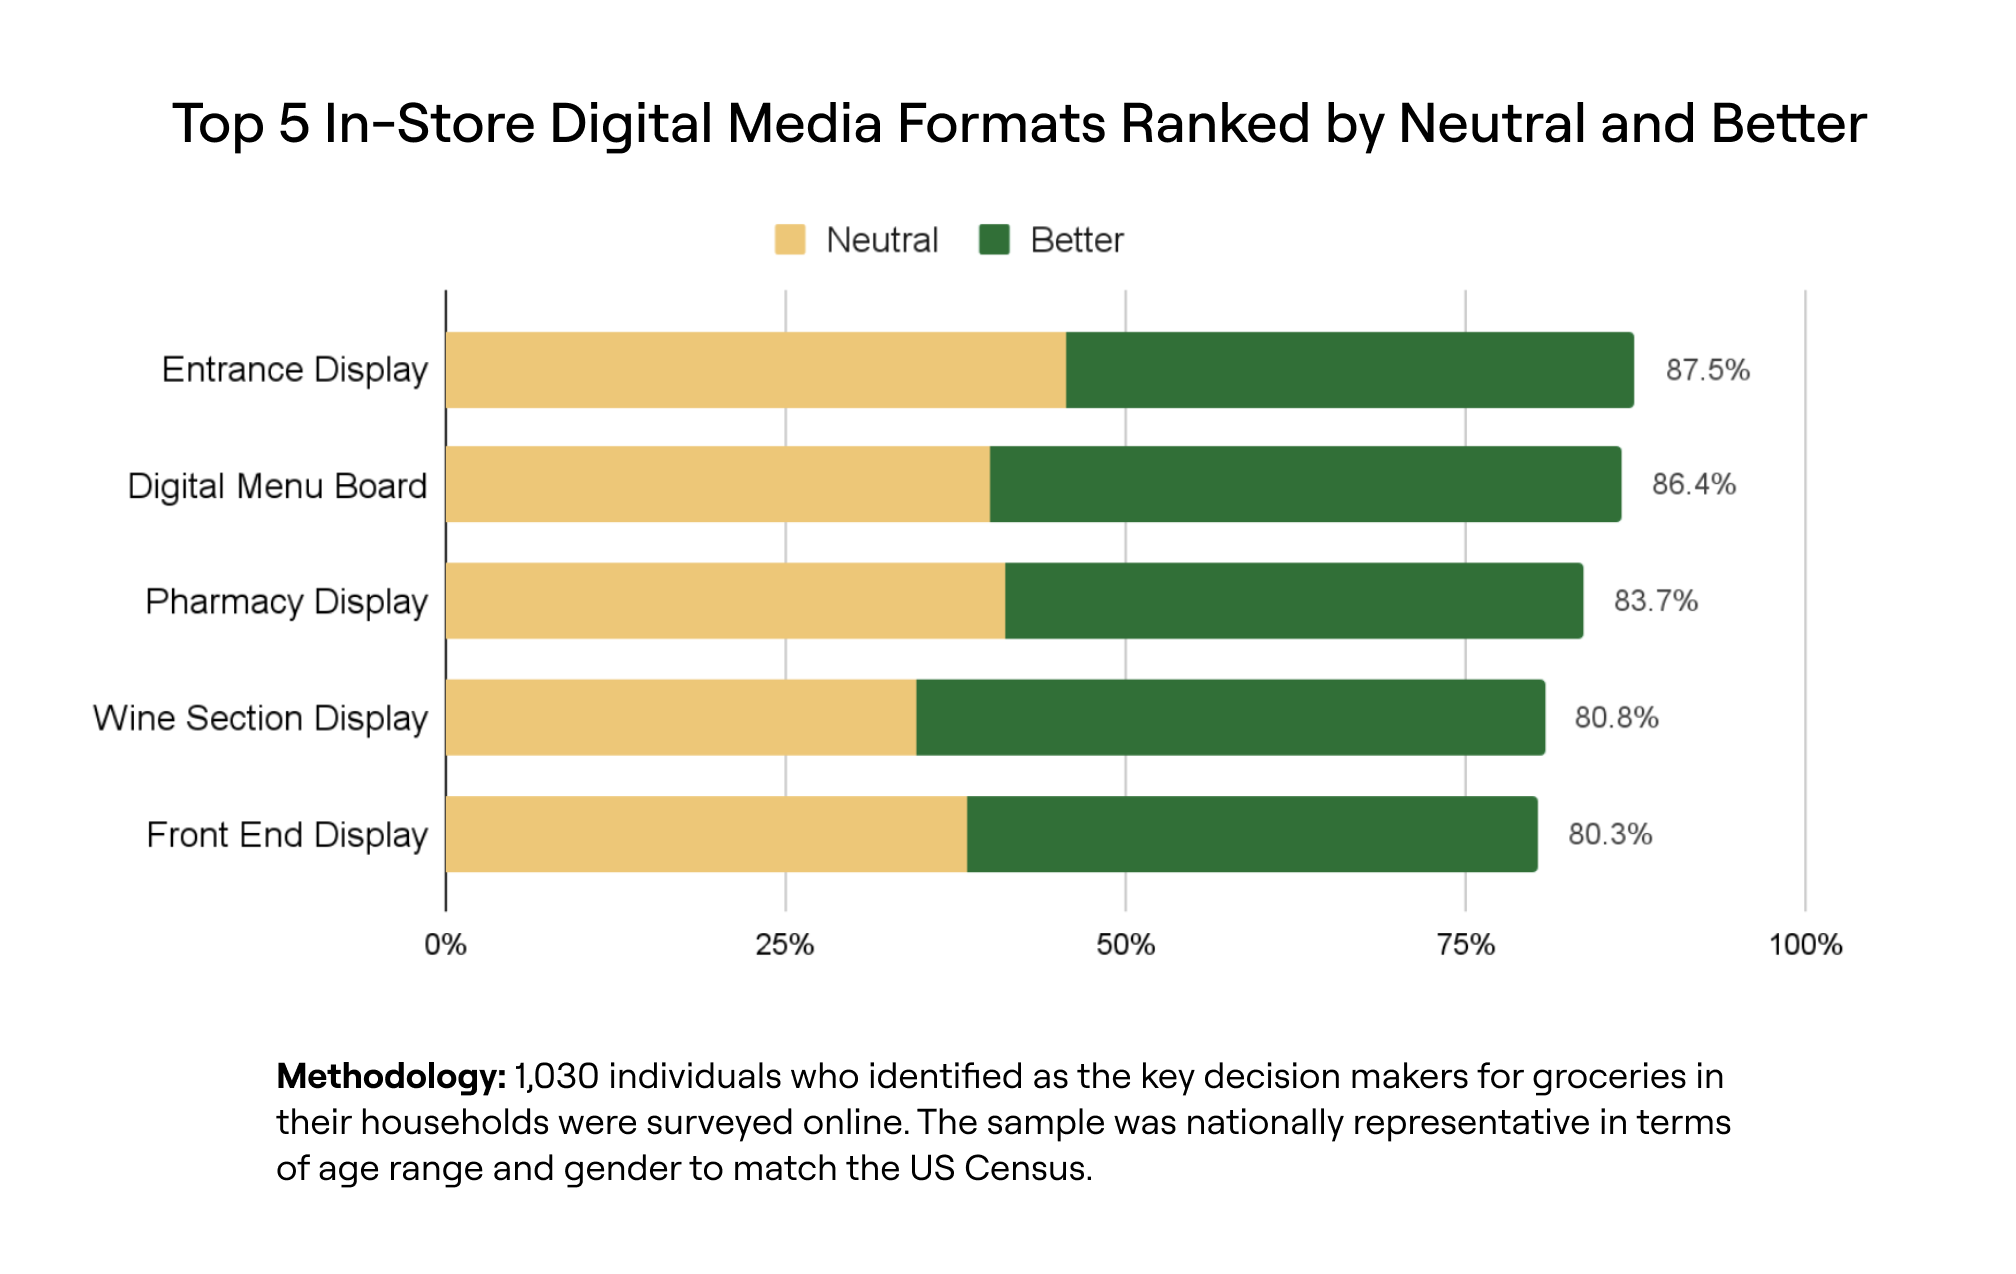 In-Store Advertising Leads in Perception and Attention Compared to Other Channels